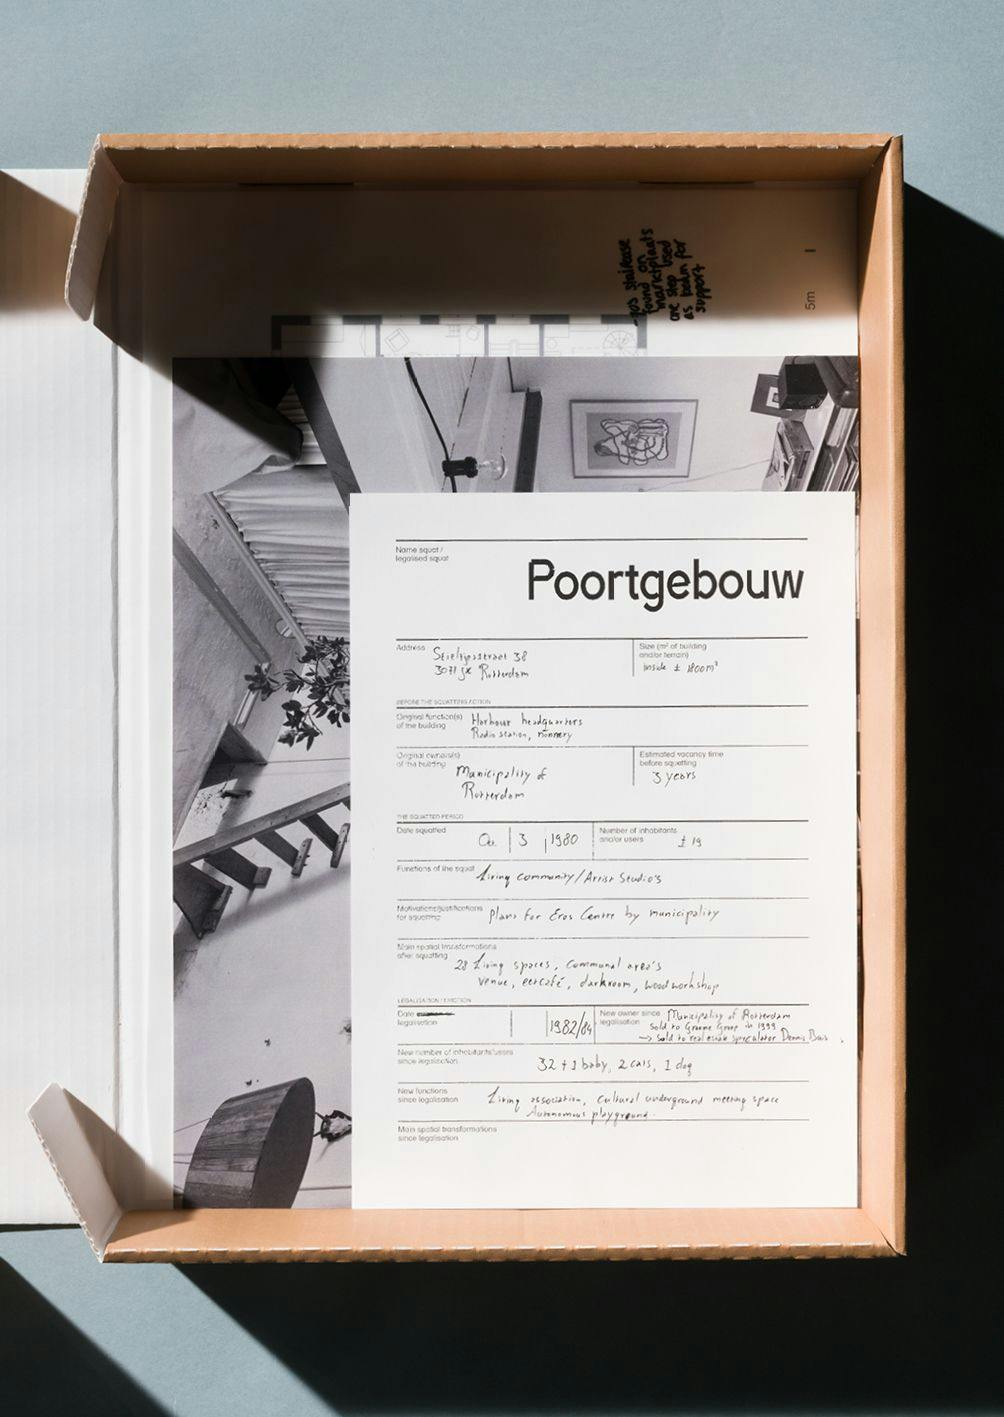 Poortgebouw. From: Architecture of Appropriation. On Squatting as Spatial Practice. Photo by Johannes Schwartz. 